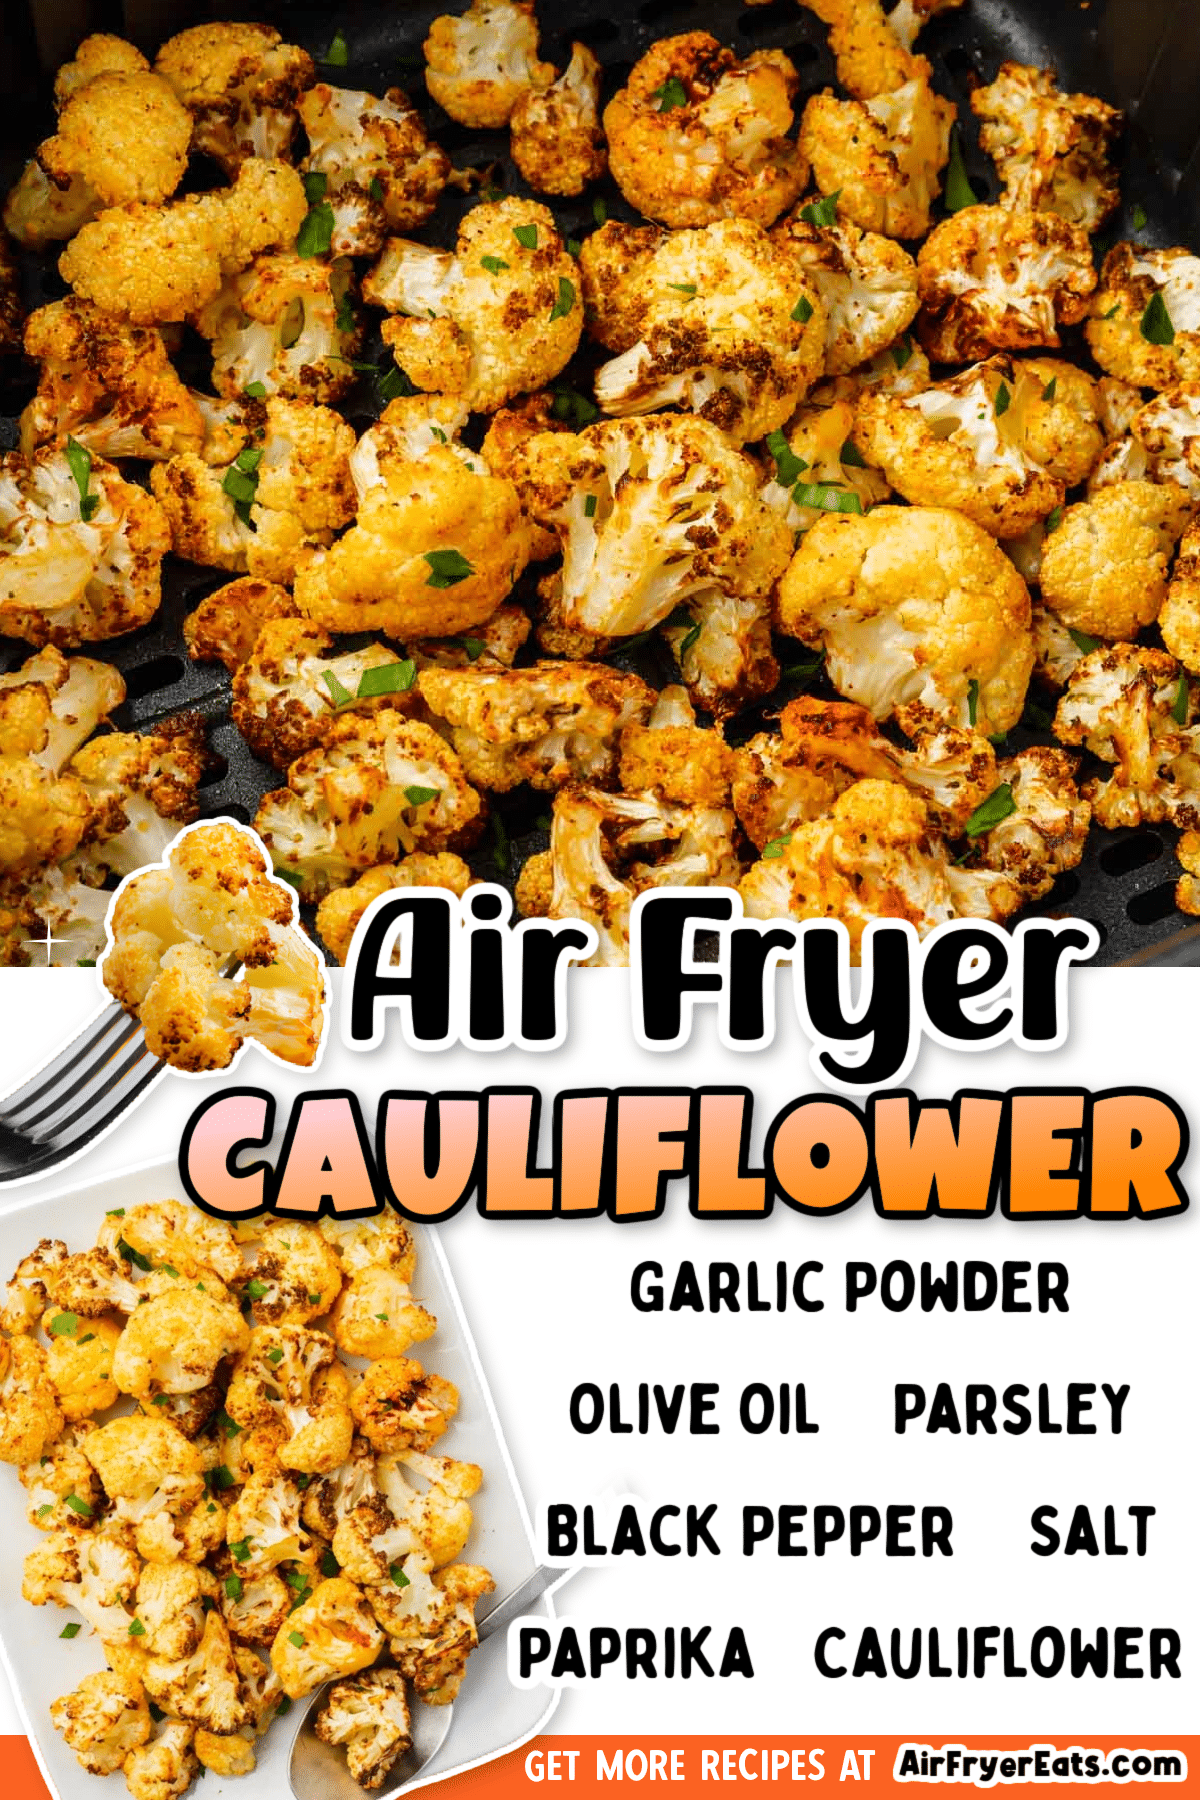 Air Fryer Cauliflower is a healthy and delicious side dish that is easy and quick to make! Just toss florets with oil and seasonings, and air fry until they're golden brown and roasted to perfection. via @vegetarianmamma